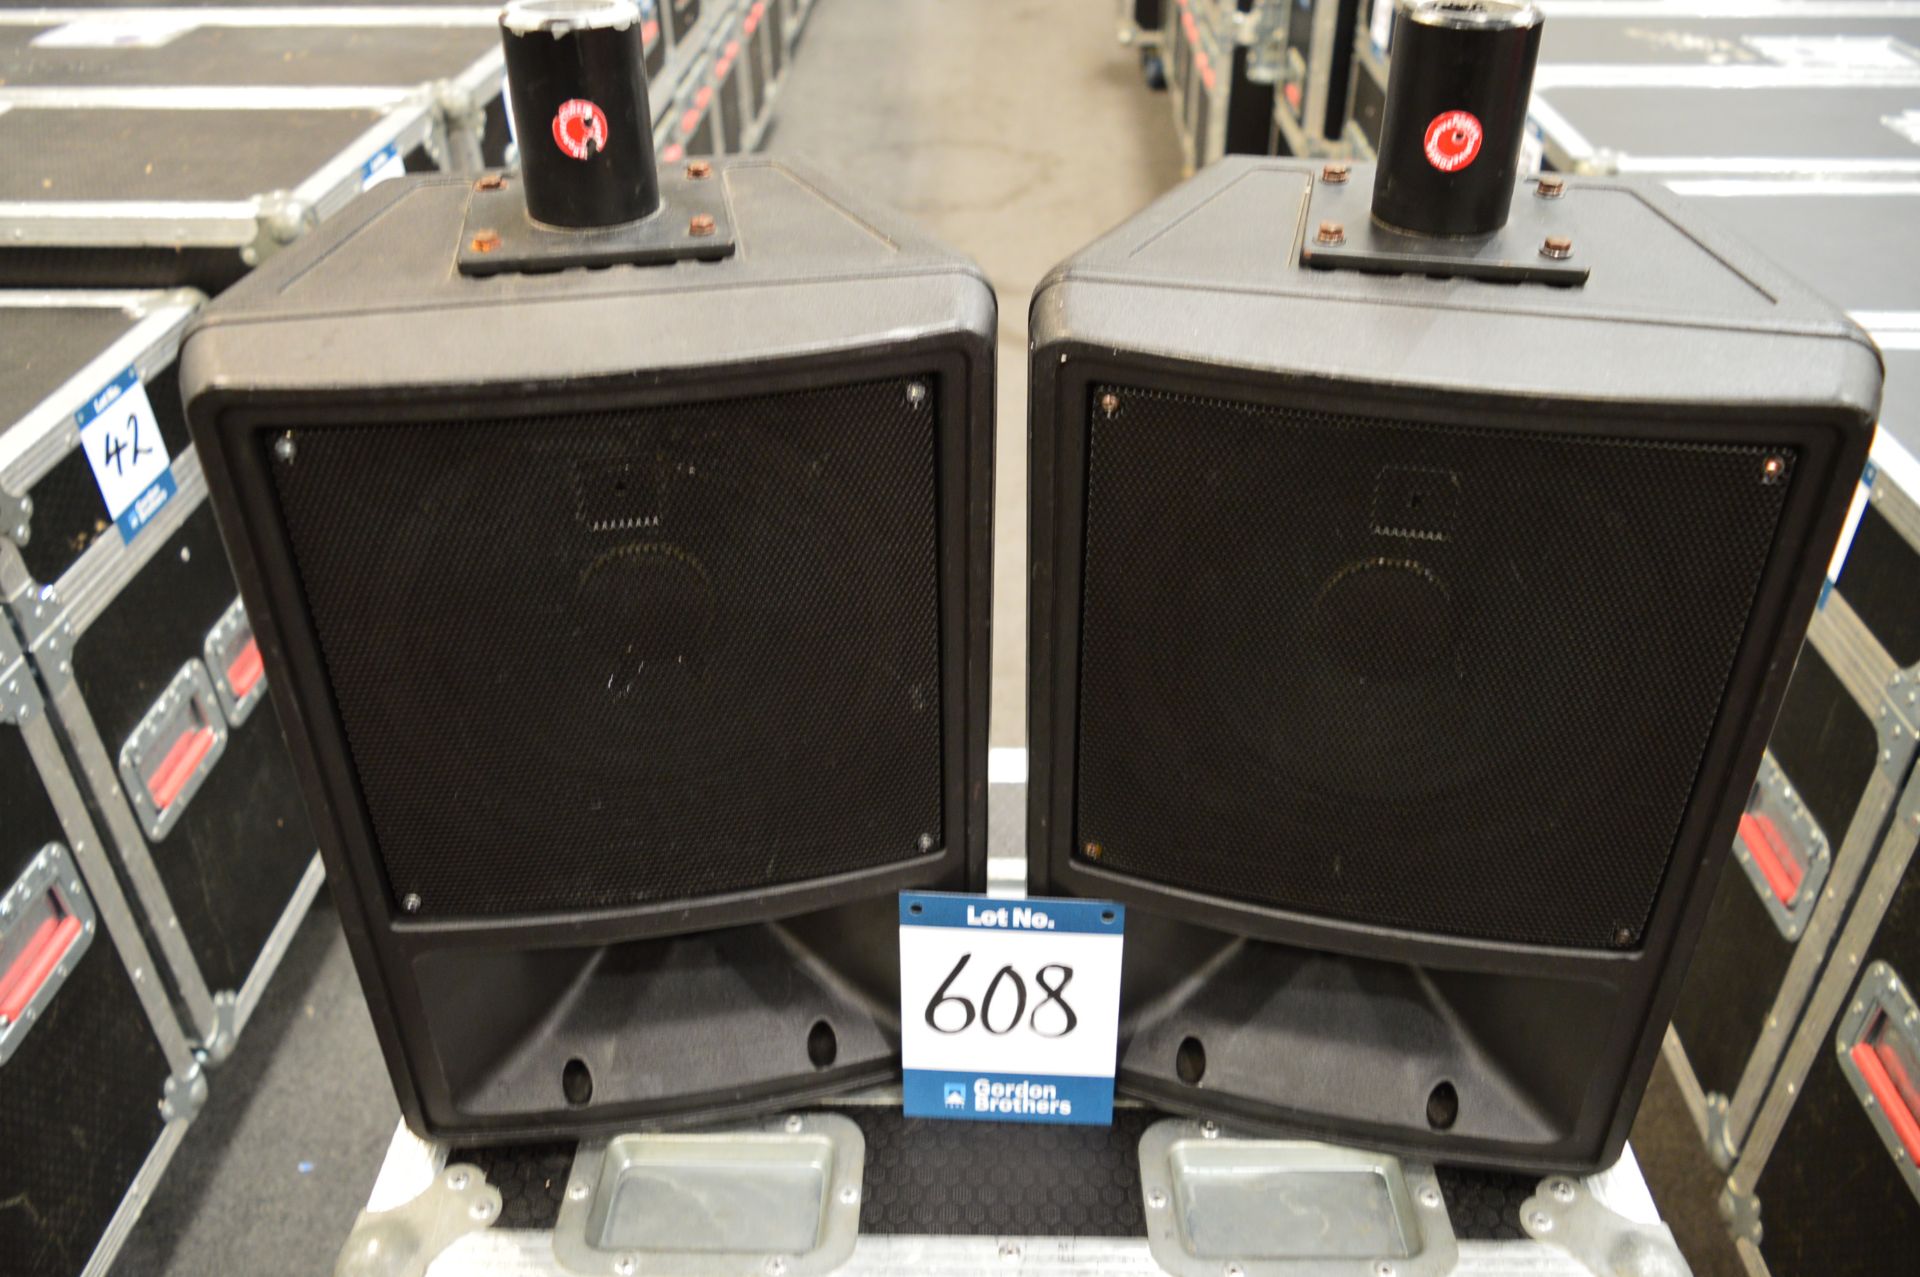 2x Electro-Voice, SX80 2-way loudspeaker with woof